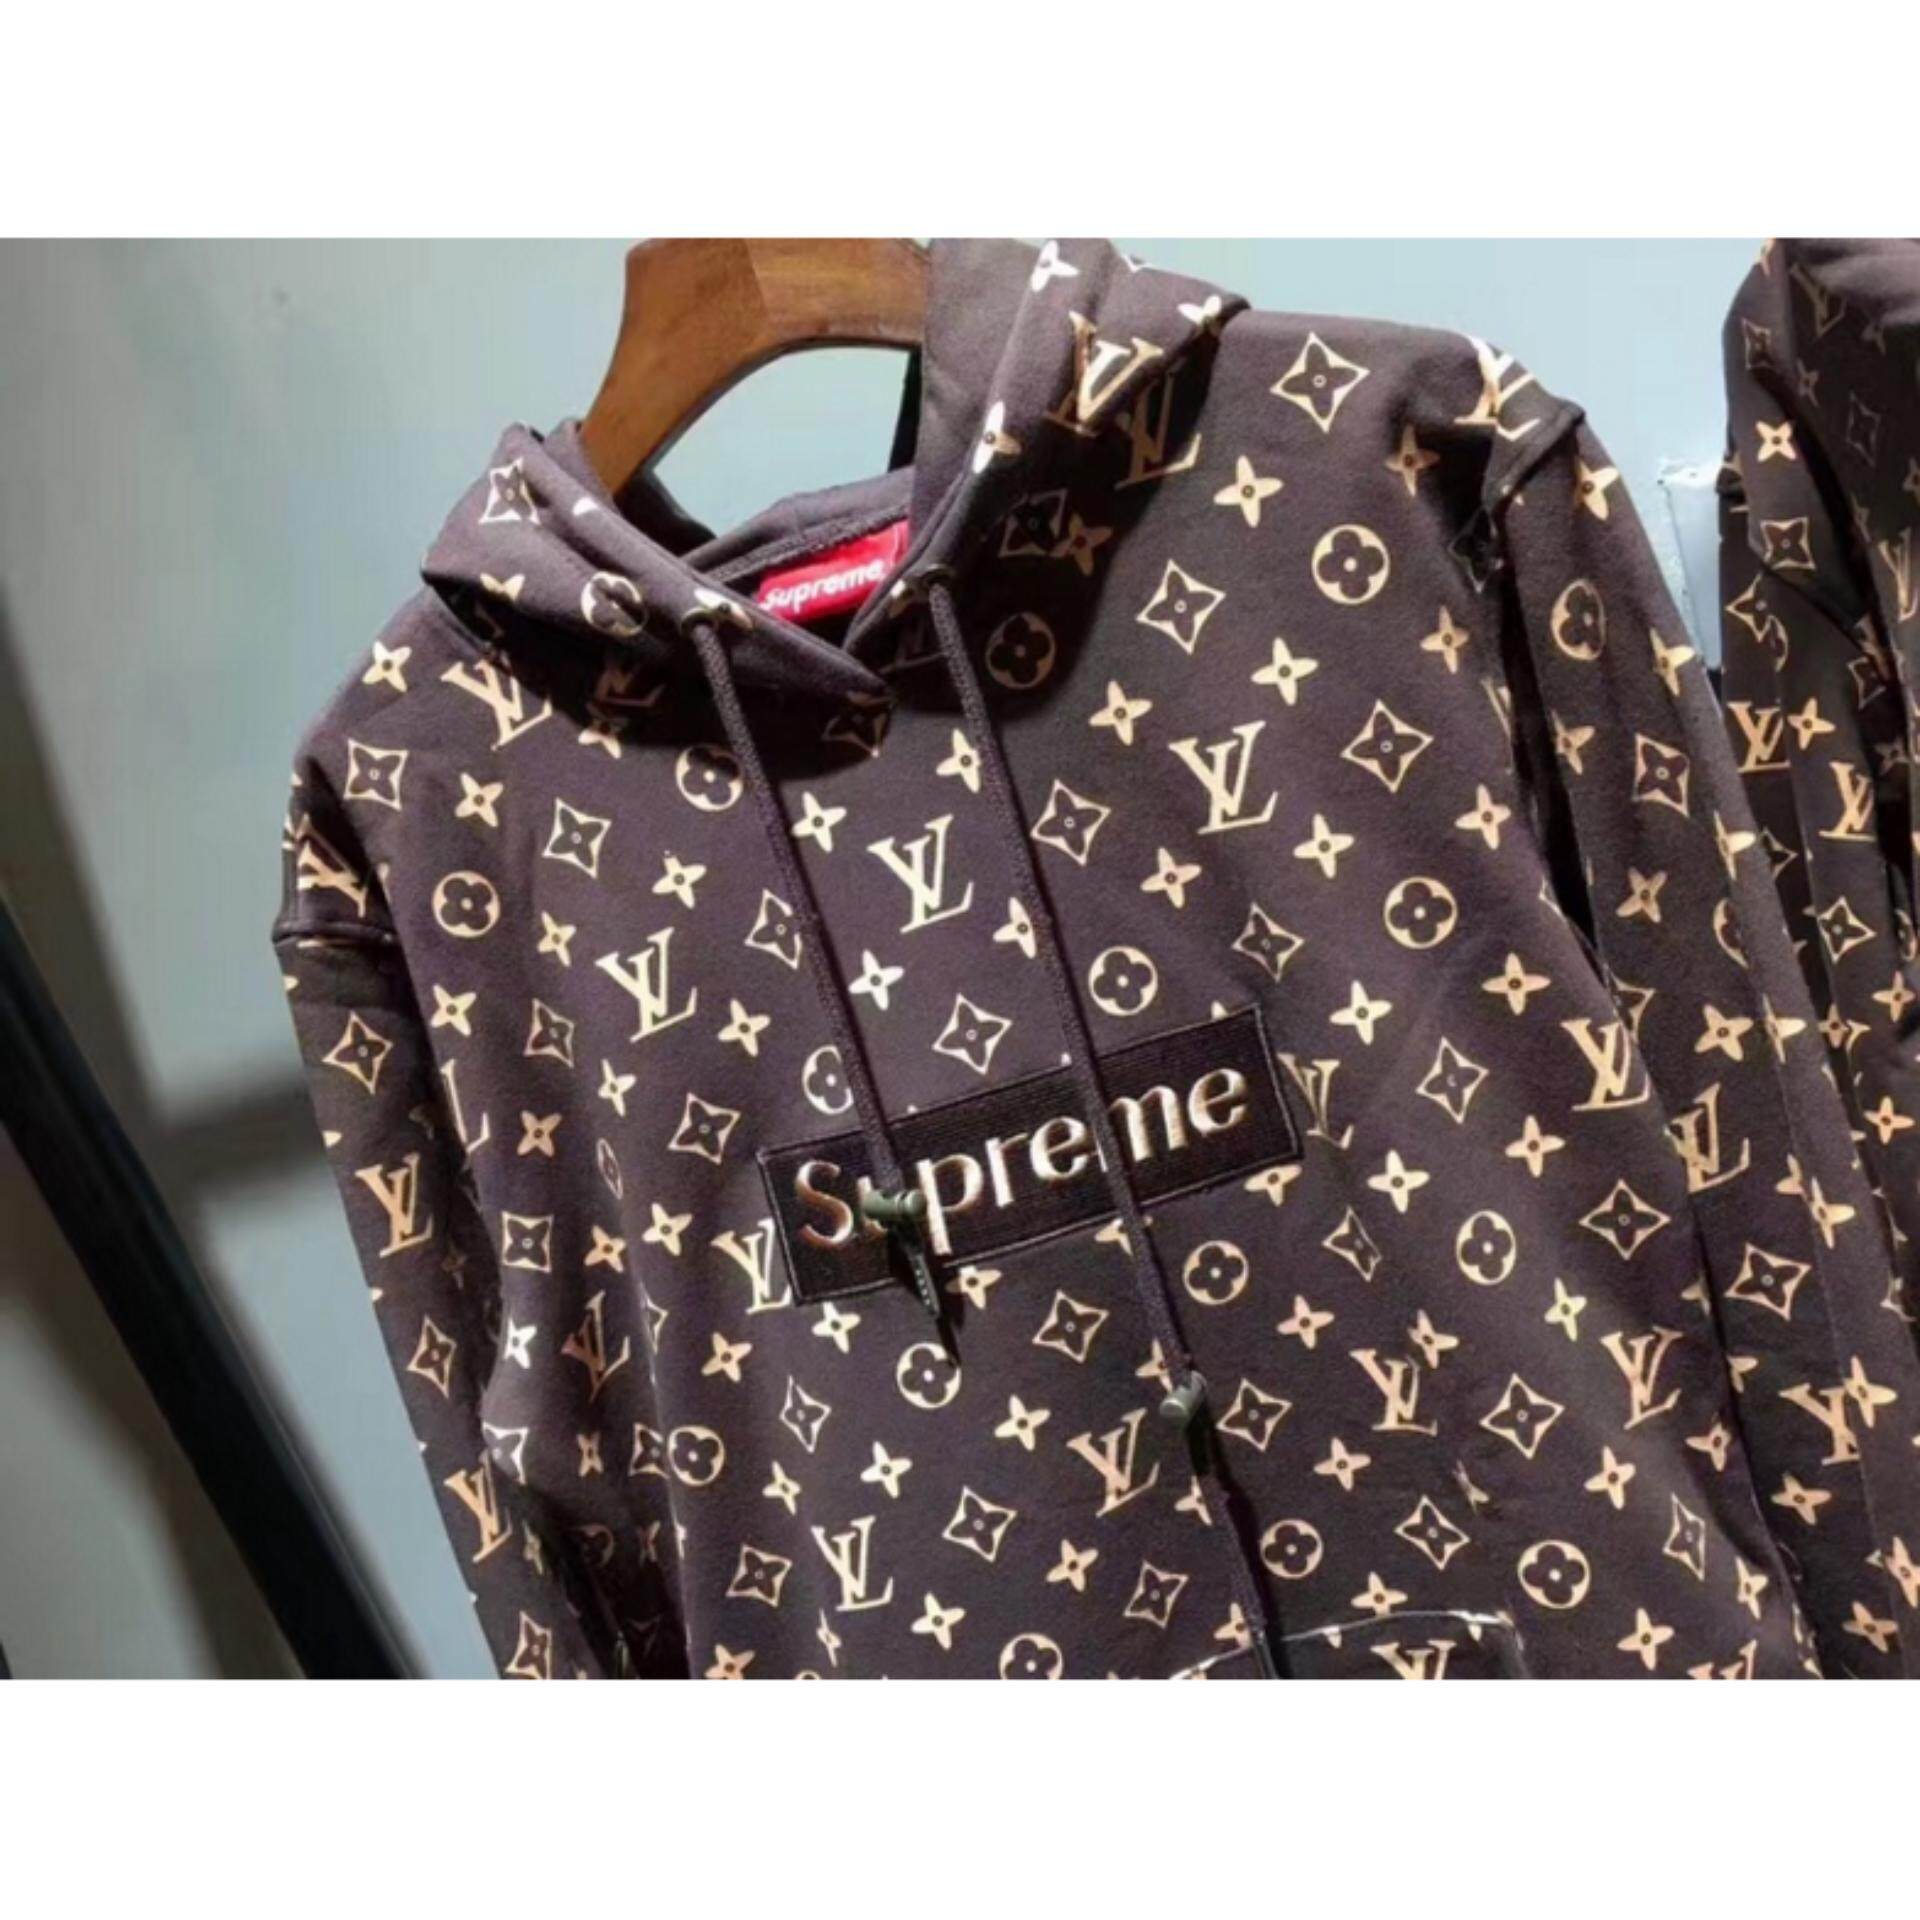 Supreme Louis Vuitton Hoodie Ebay Cheap | Confederated Tribes of the Umatilla Indian Reservation